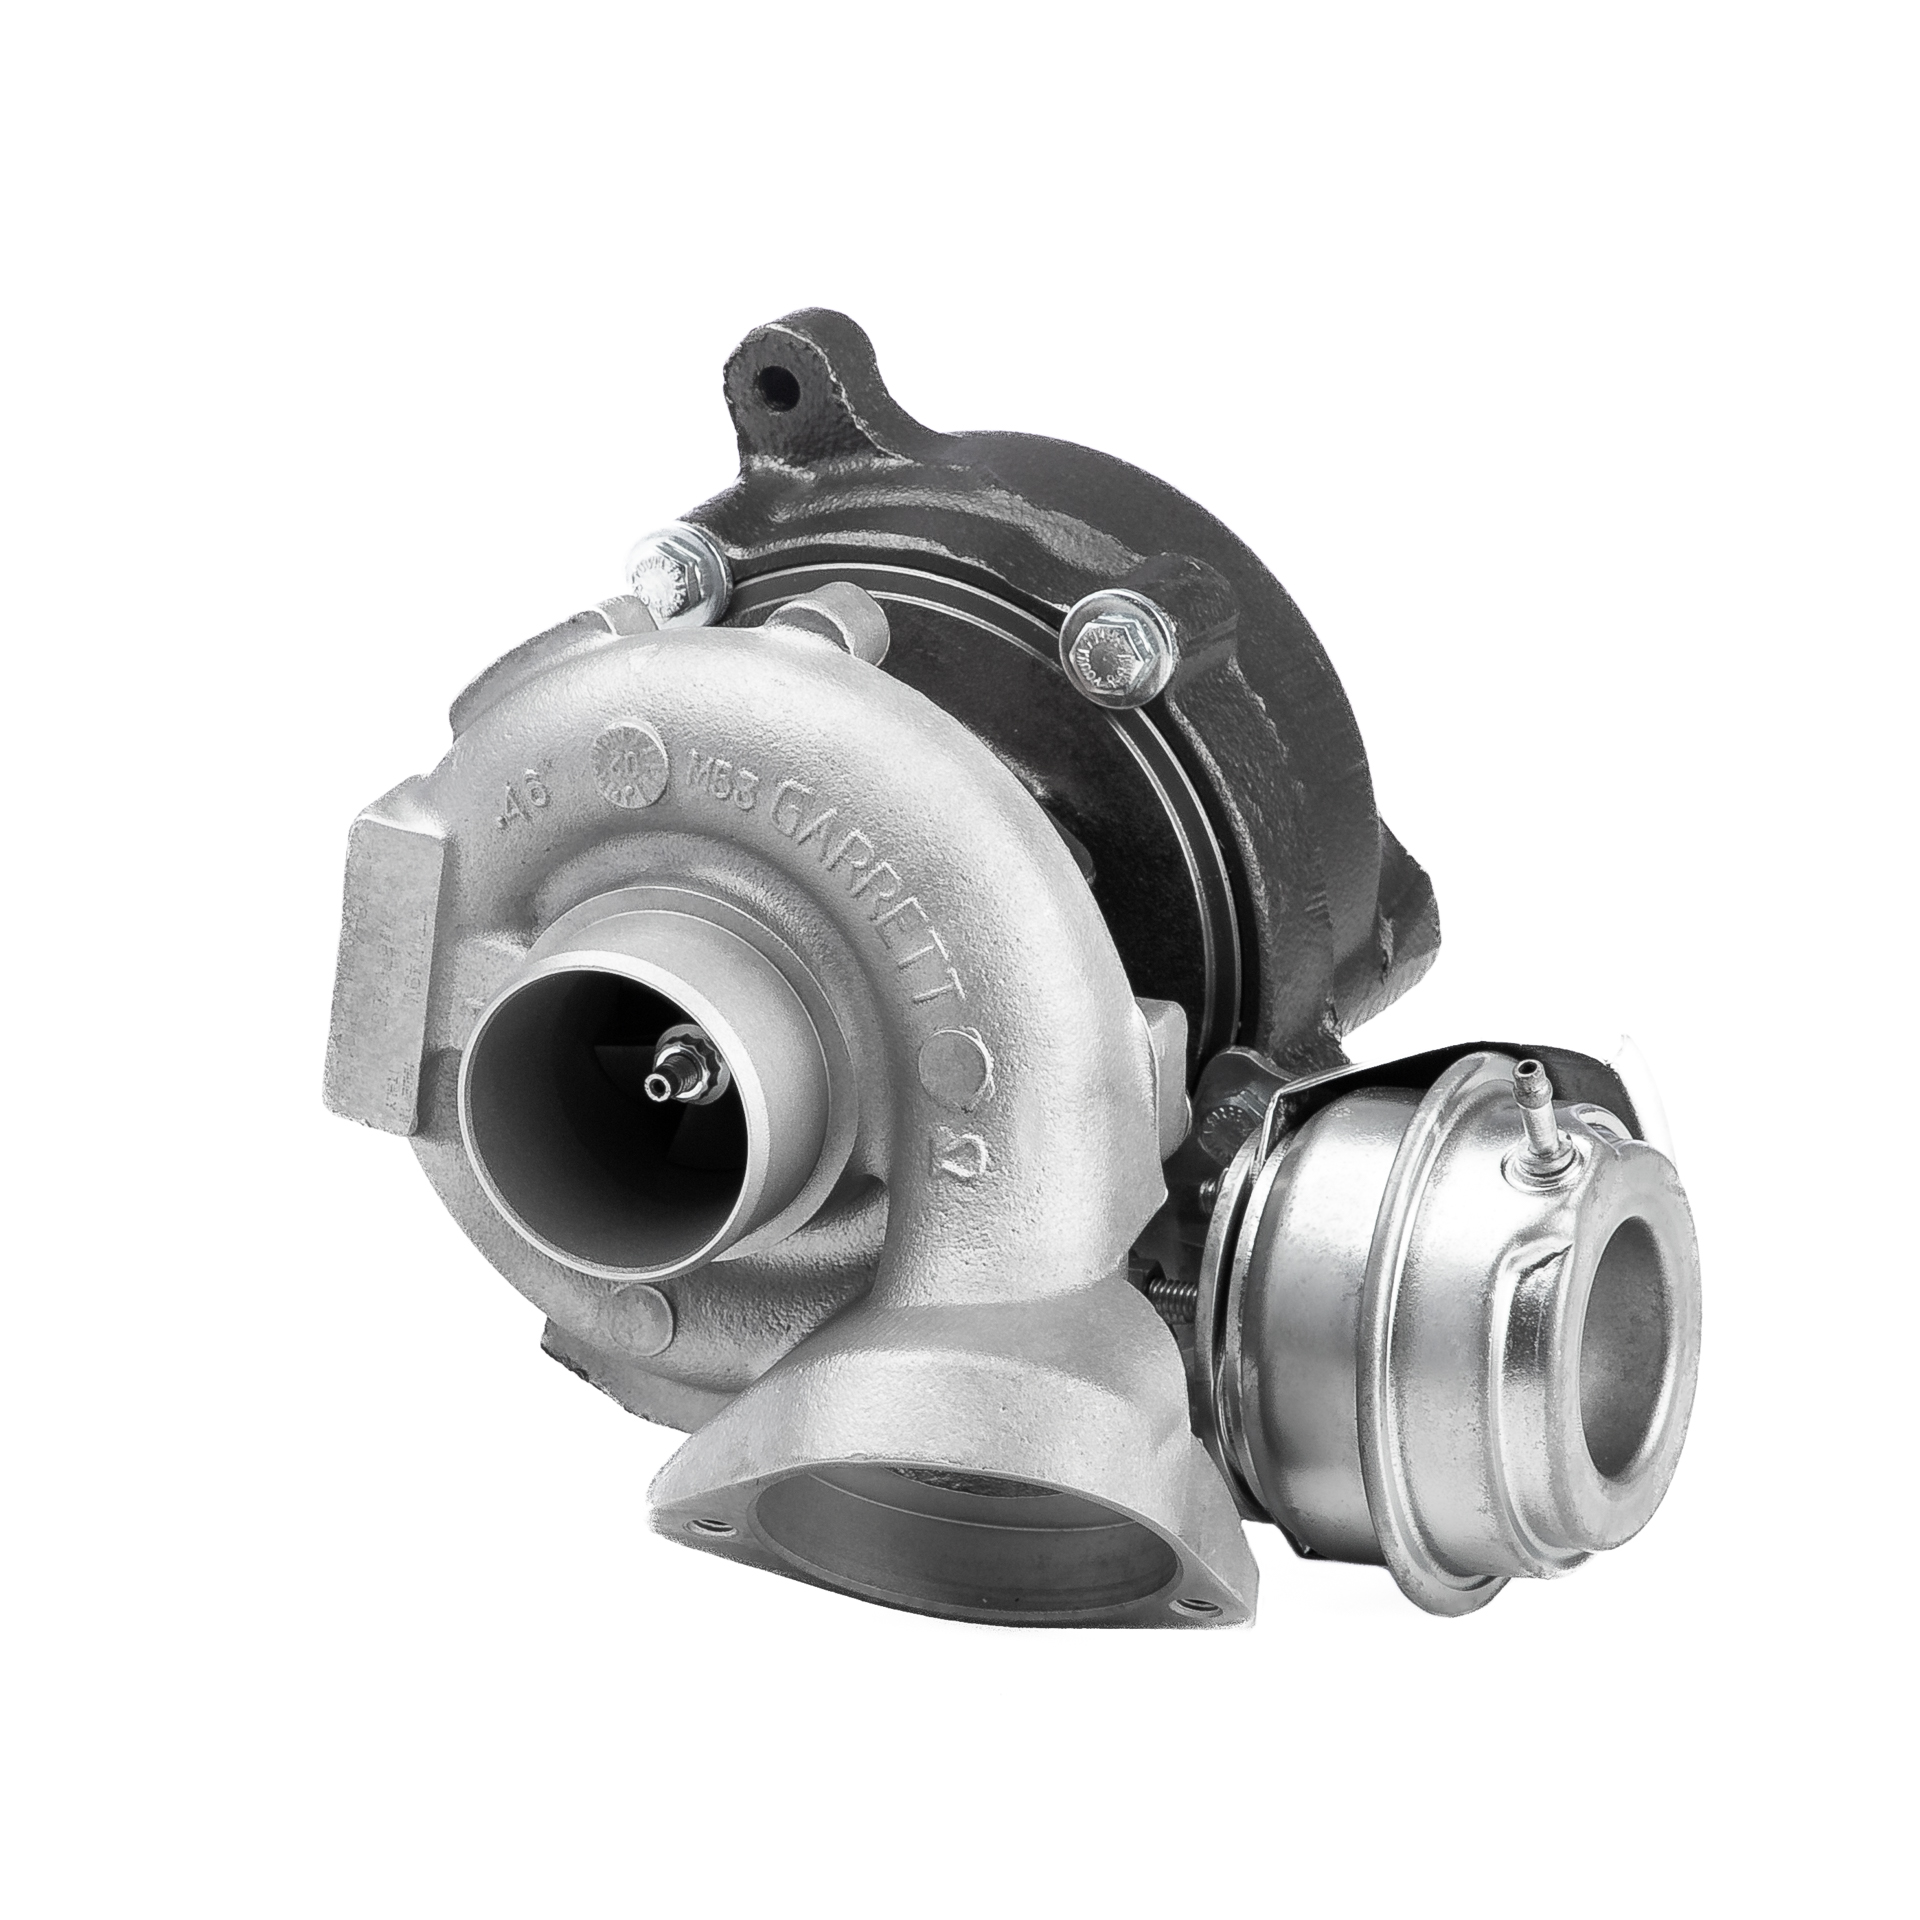 BMW 1 Series Turbocharger 16875779 BR Turbo 750431-5001RS online buy